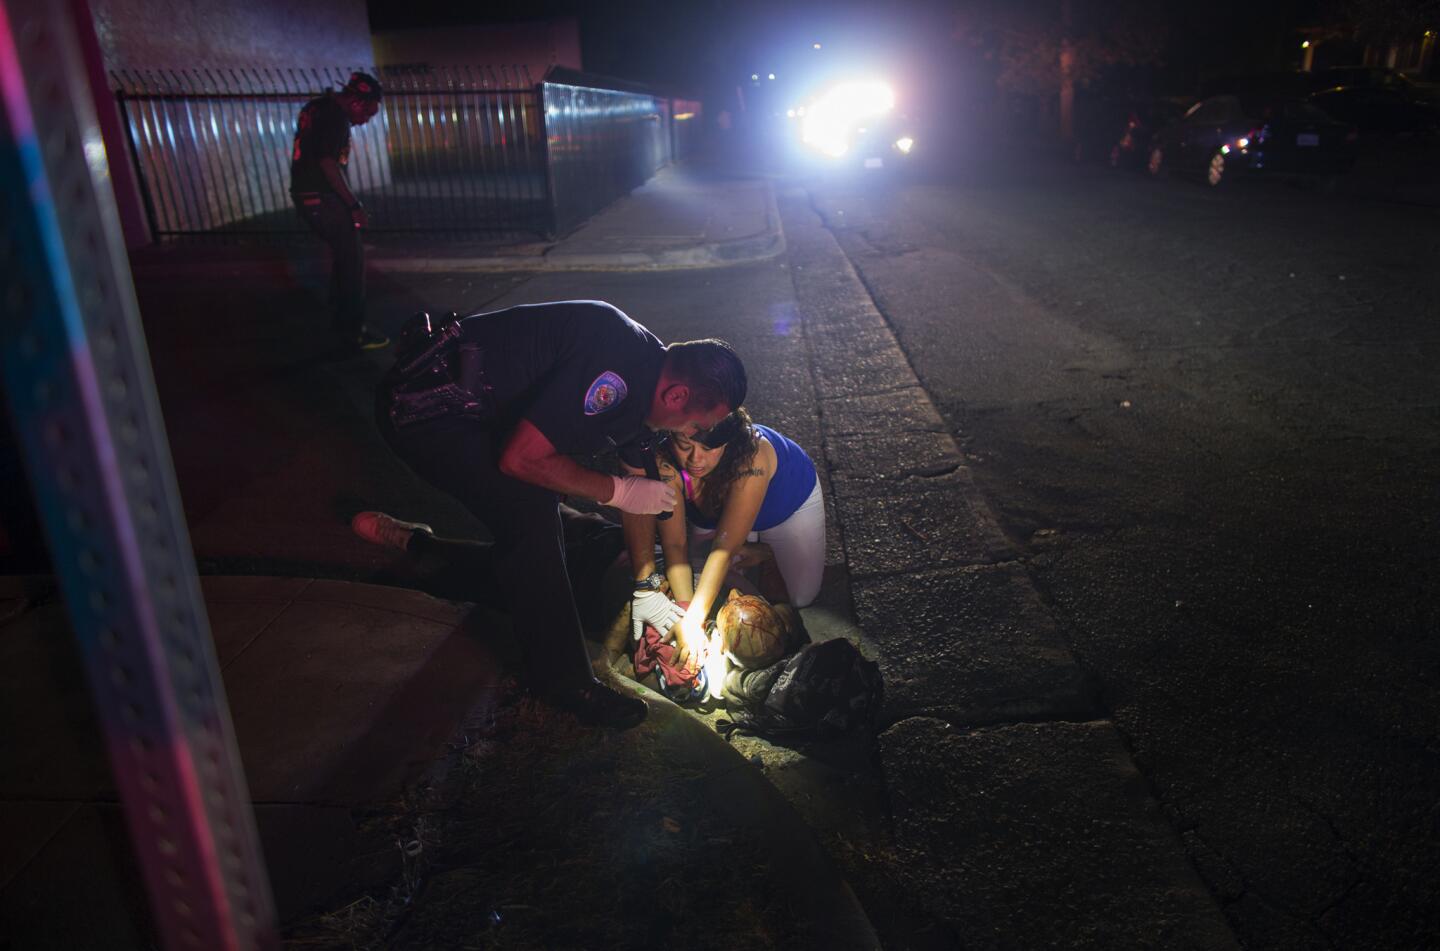 A San Bernardino police officer assists as a resident tries to stop the bleeding of a male gunshot victim found lying next to the curb after being shot with a shotgun at the intersection of 11th Street and Acacia Avenue on July 29, 2016. There have been 150 shootings and 47 homicides so far this year in the city. This victim survived, but declined to identify who shot him.